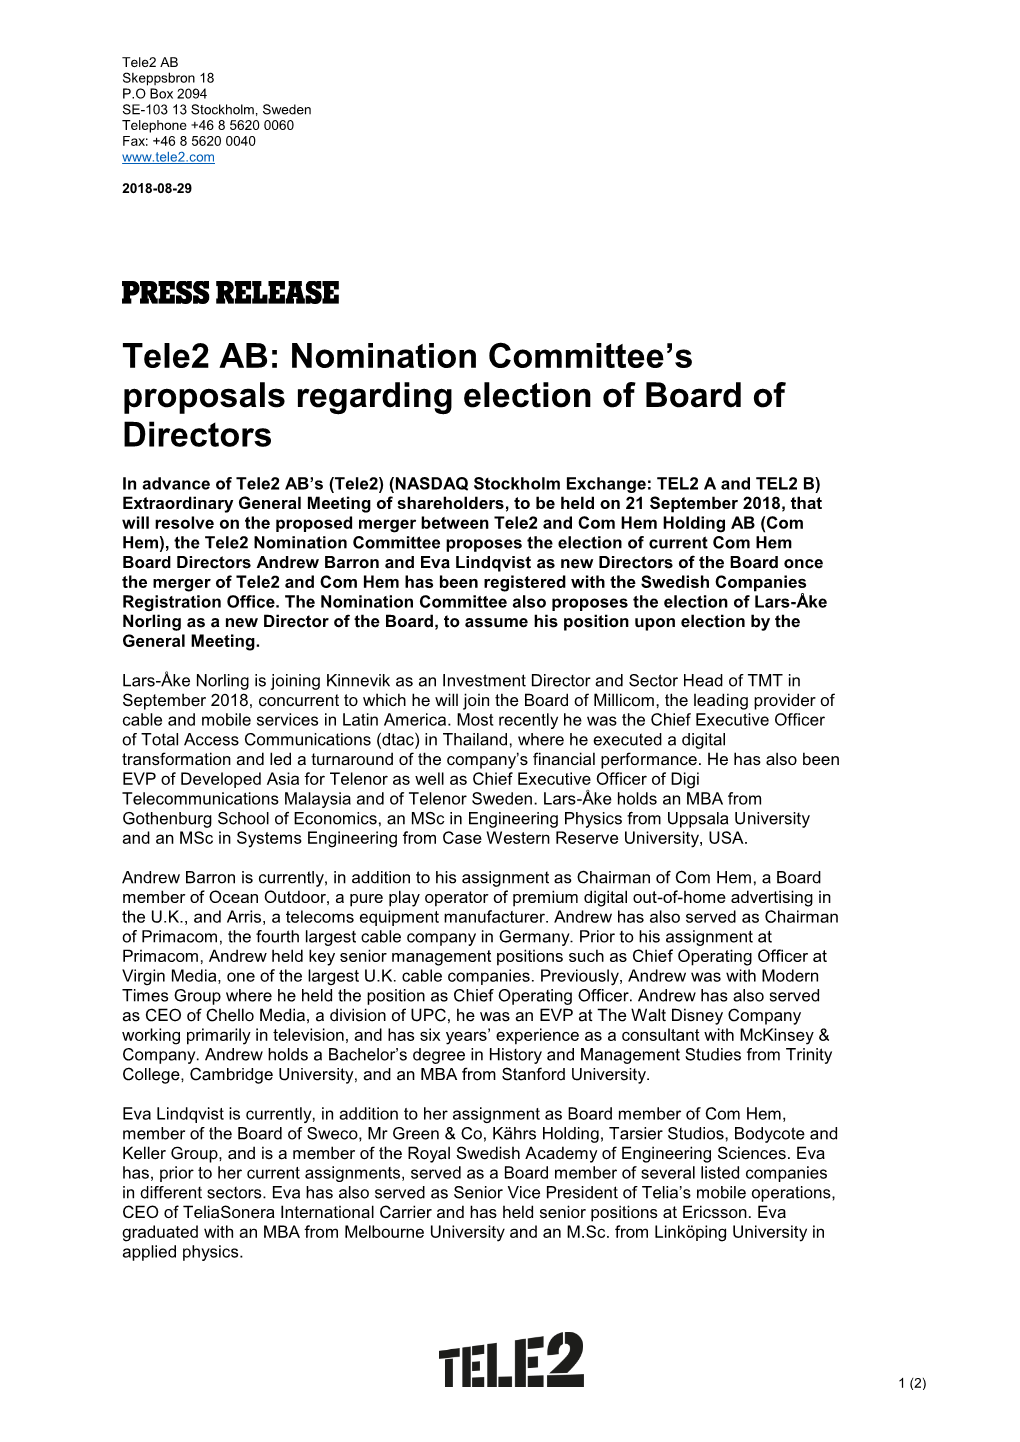 Tele2 AB: Nomination Committee's Proposals Regarding Election Of